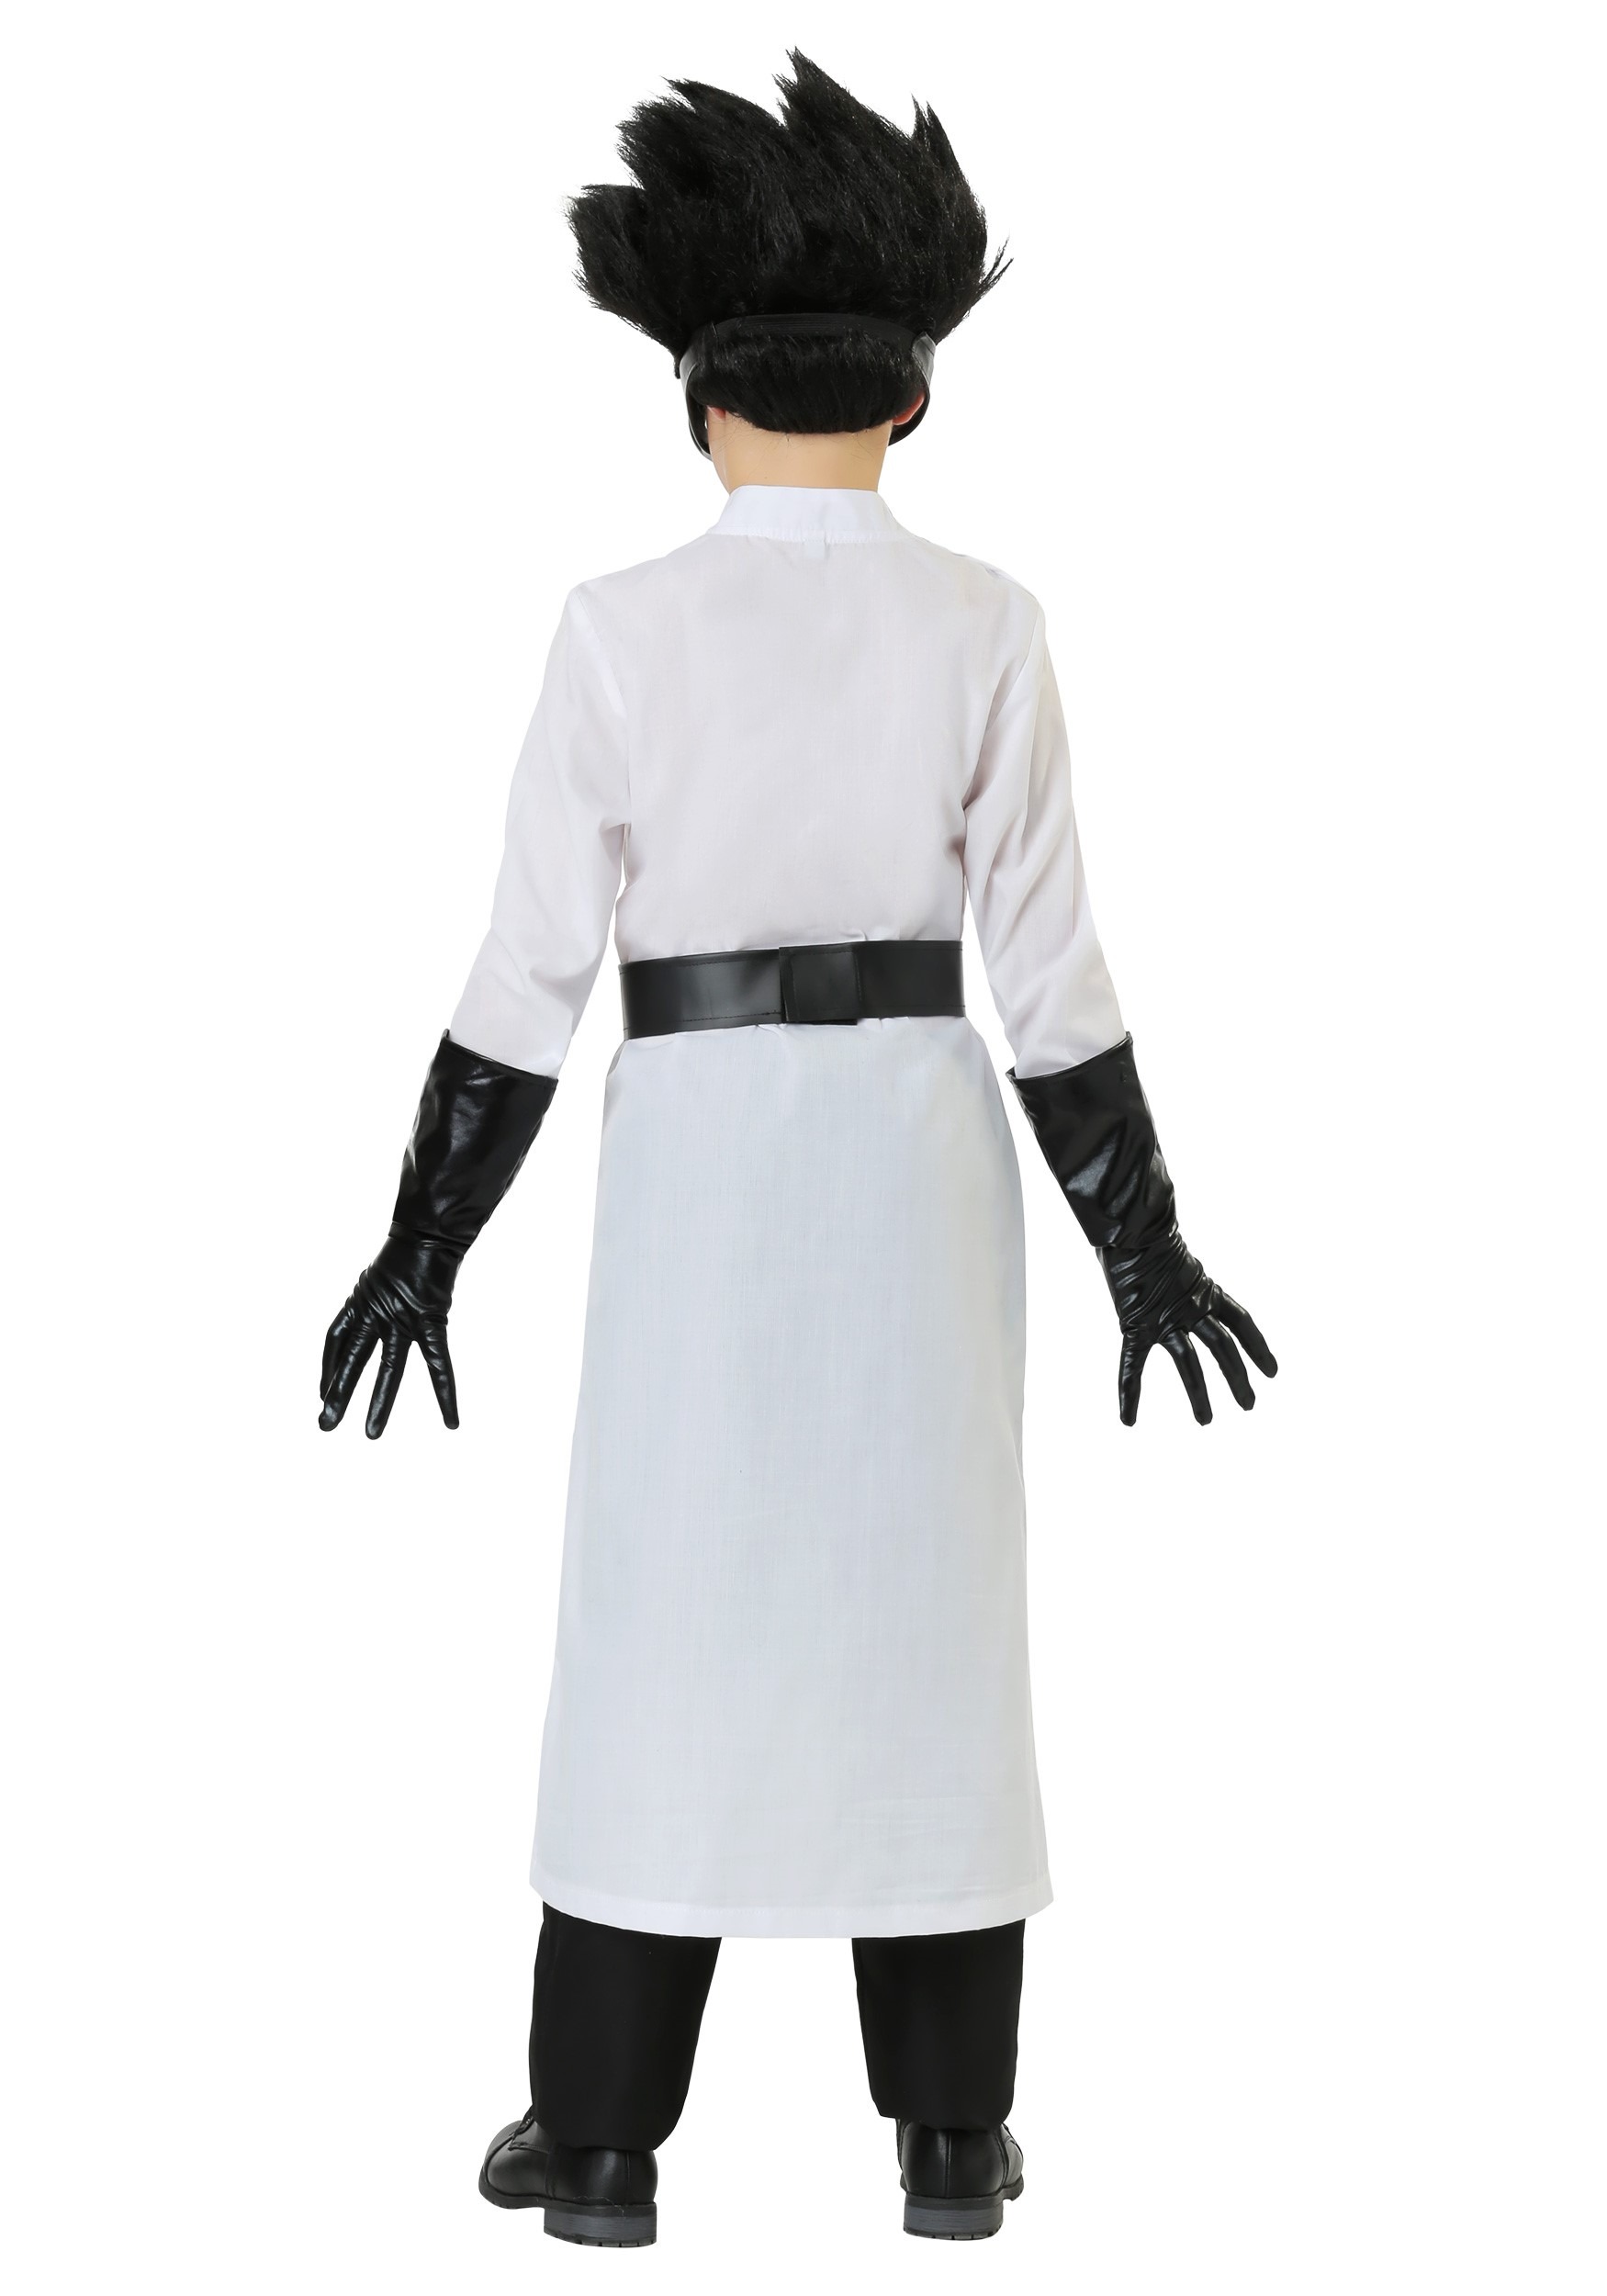 Mad Scientist Costume For Kids